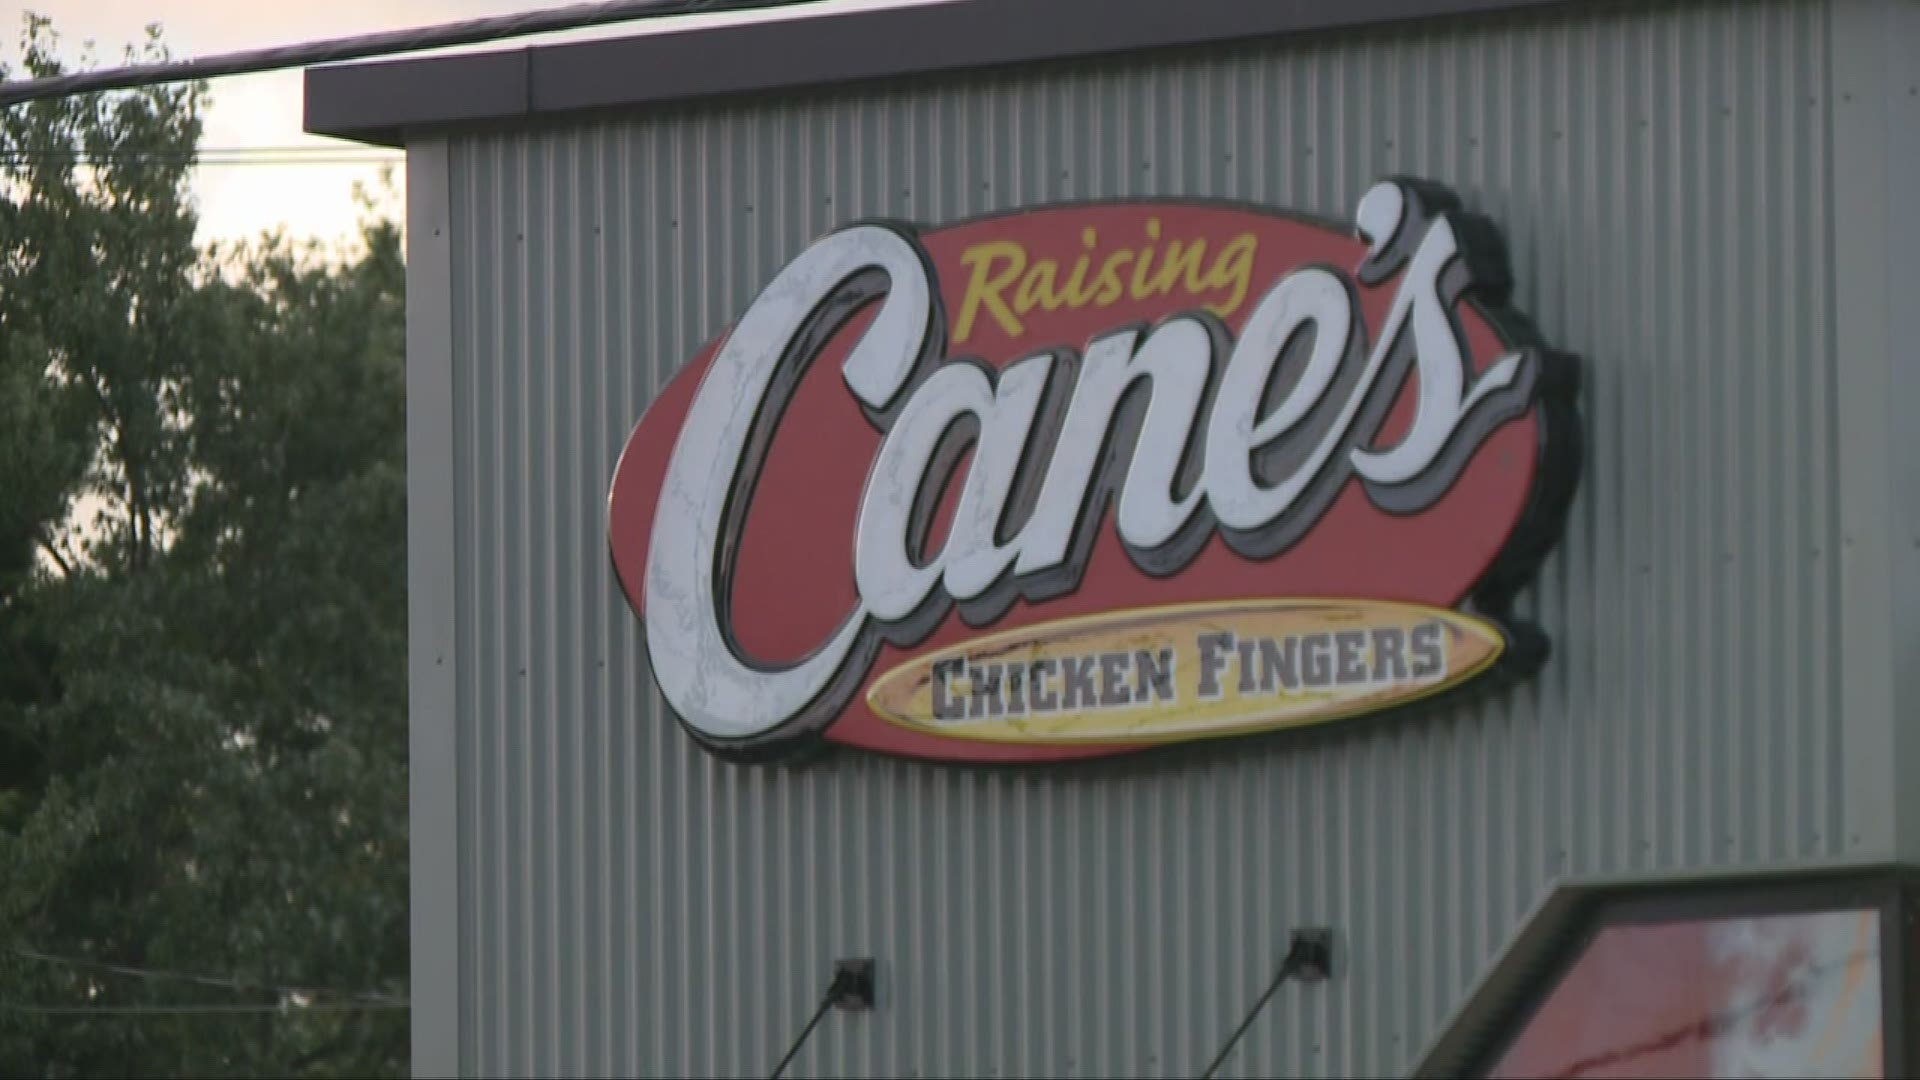 The fast food chain known for chicken fingers, crinkle-cut fries, Texas toast and special Cane’s sauce, has been given the award for 'Best Chicken Tenders.'